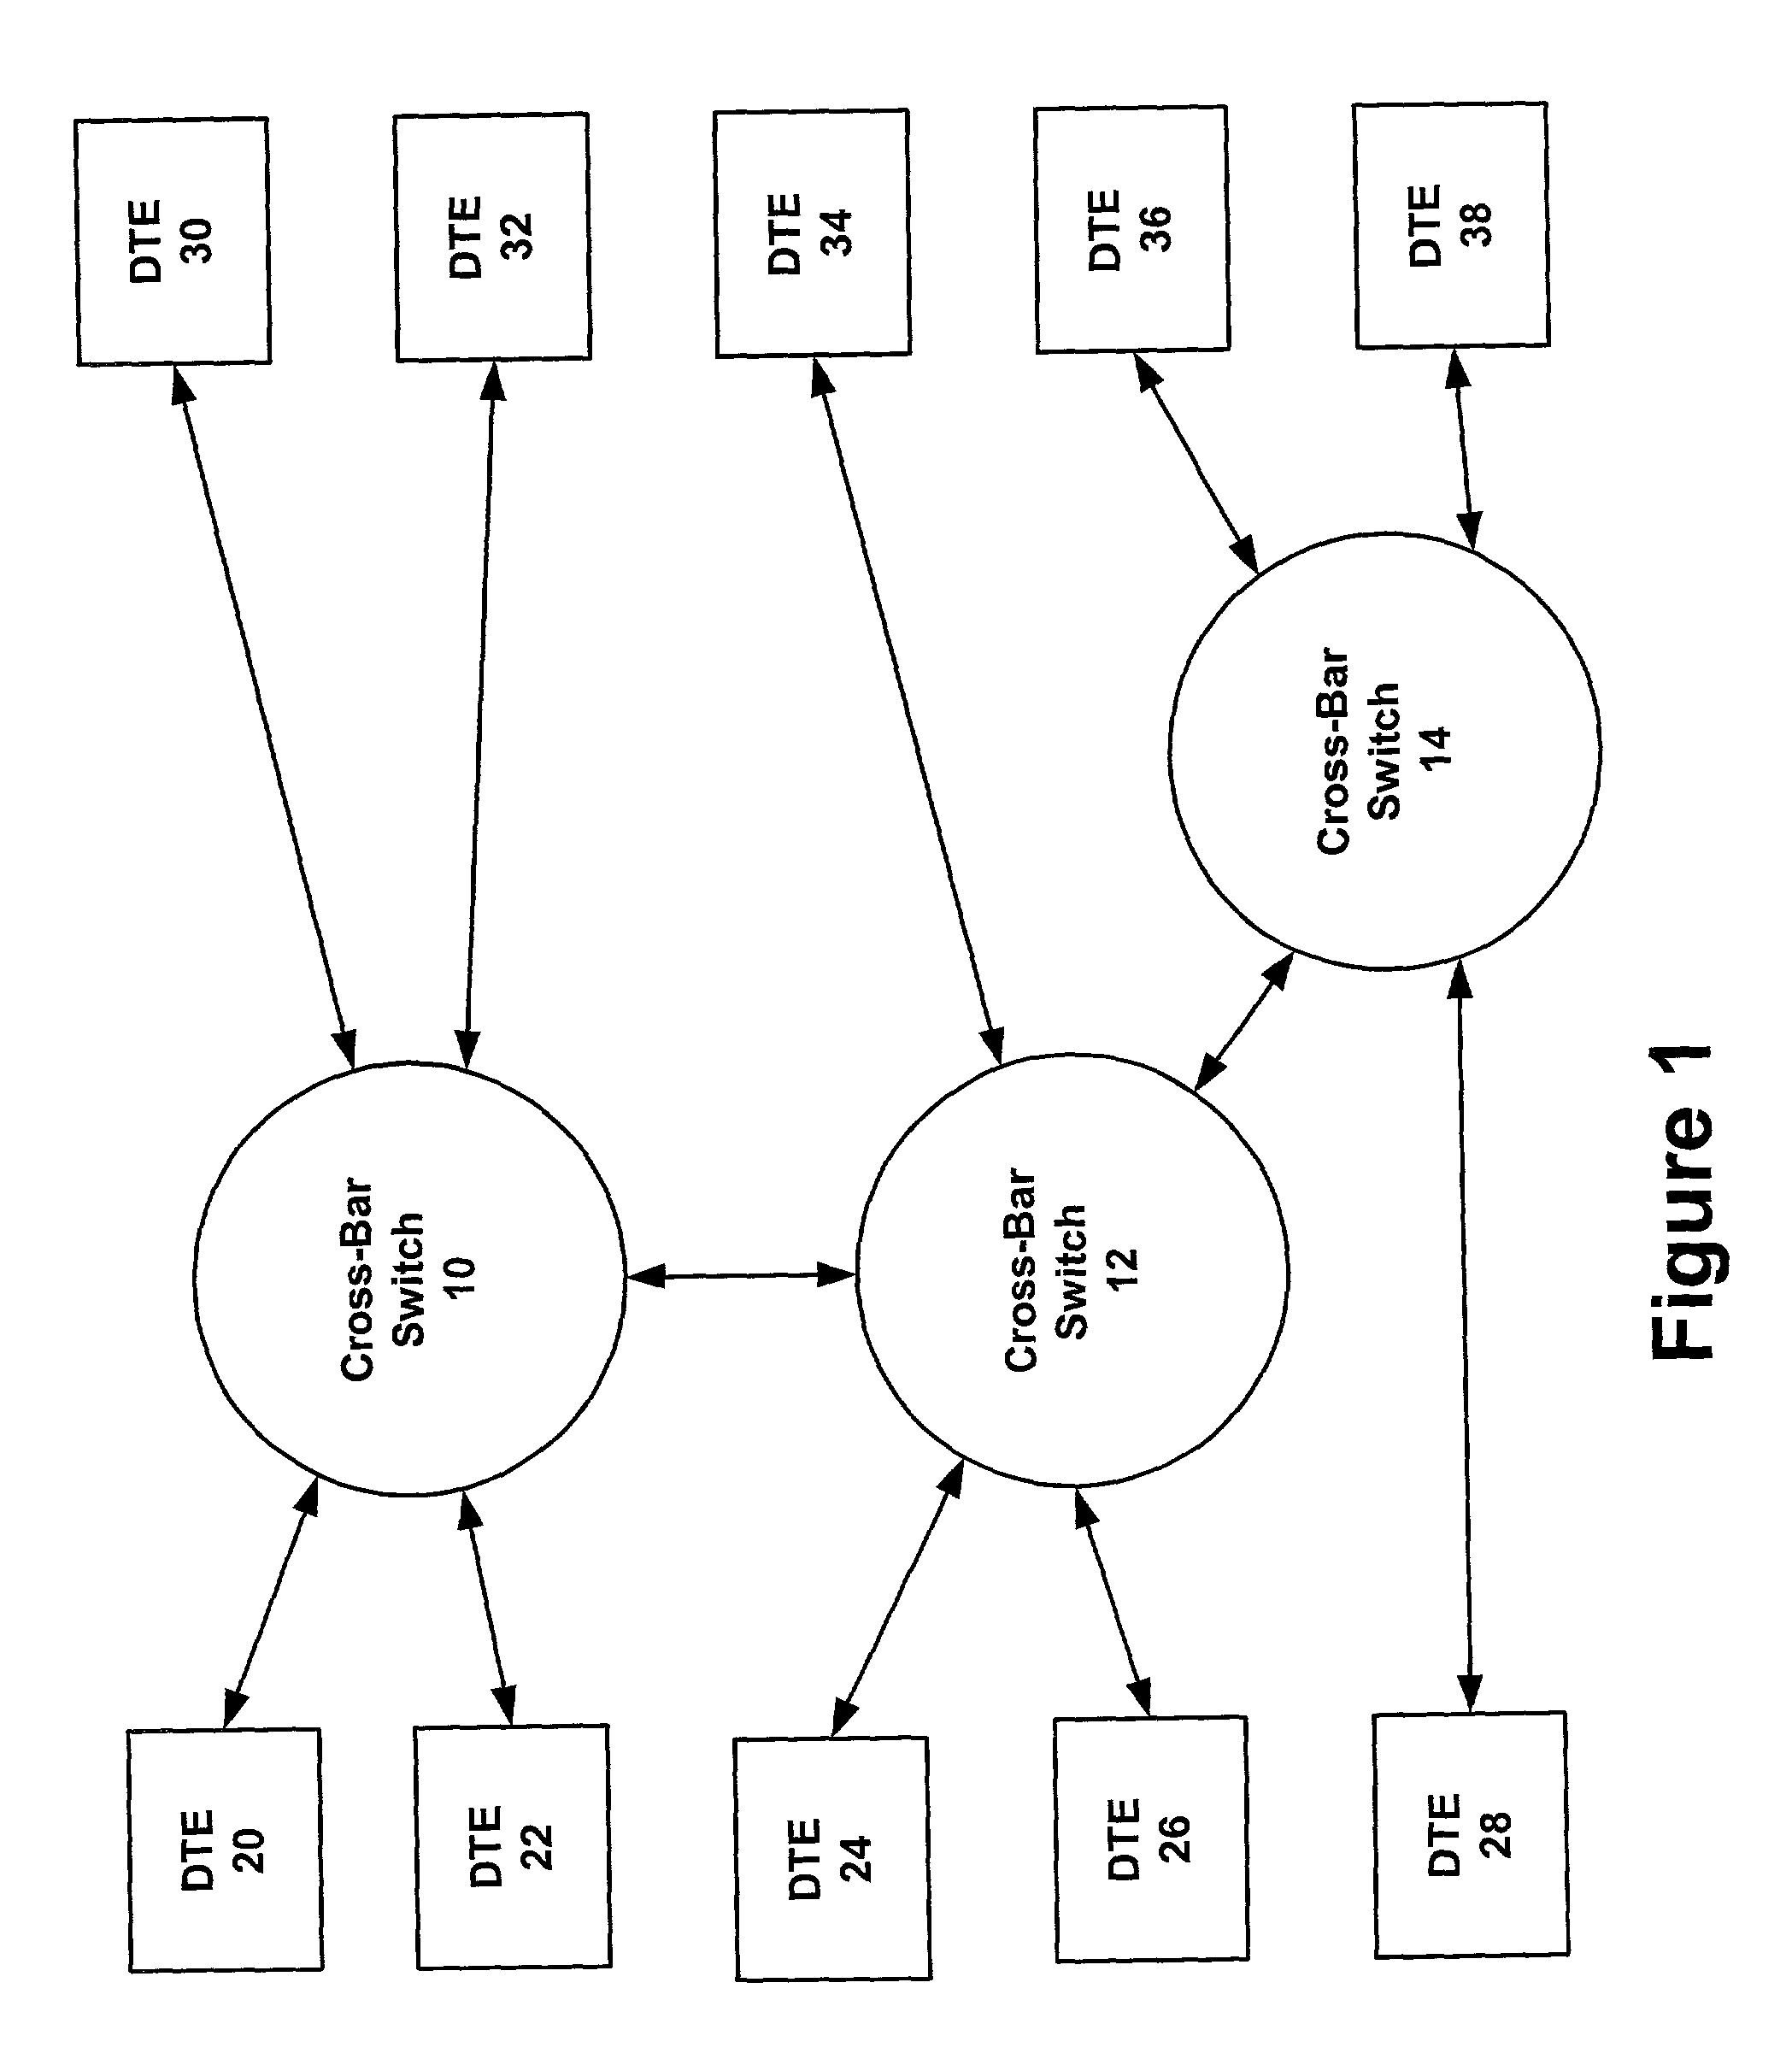 Cross-bar switch supporting implicit multicast addressing